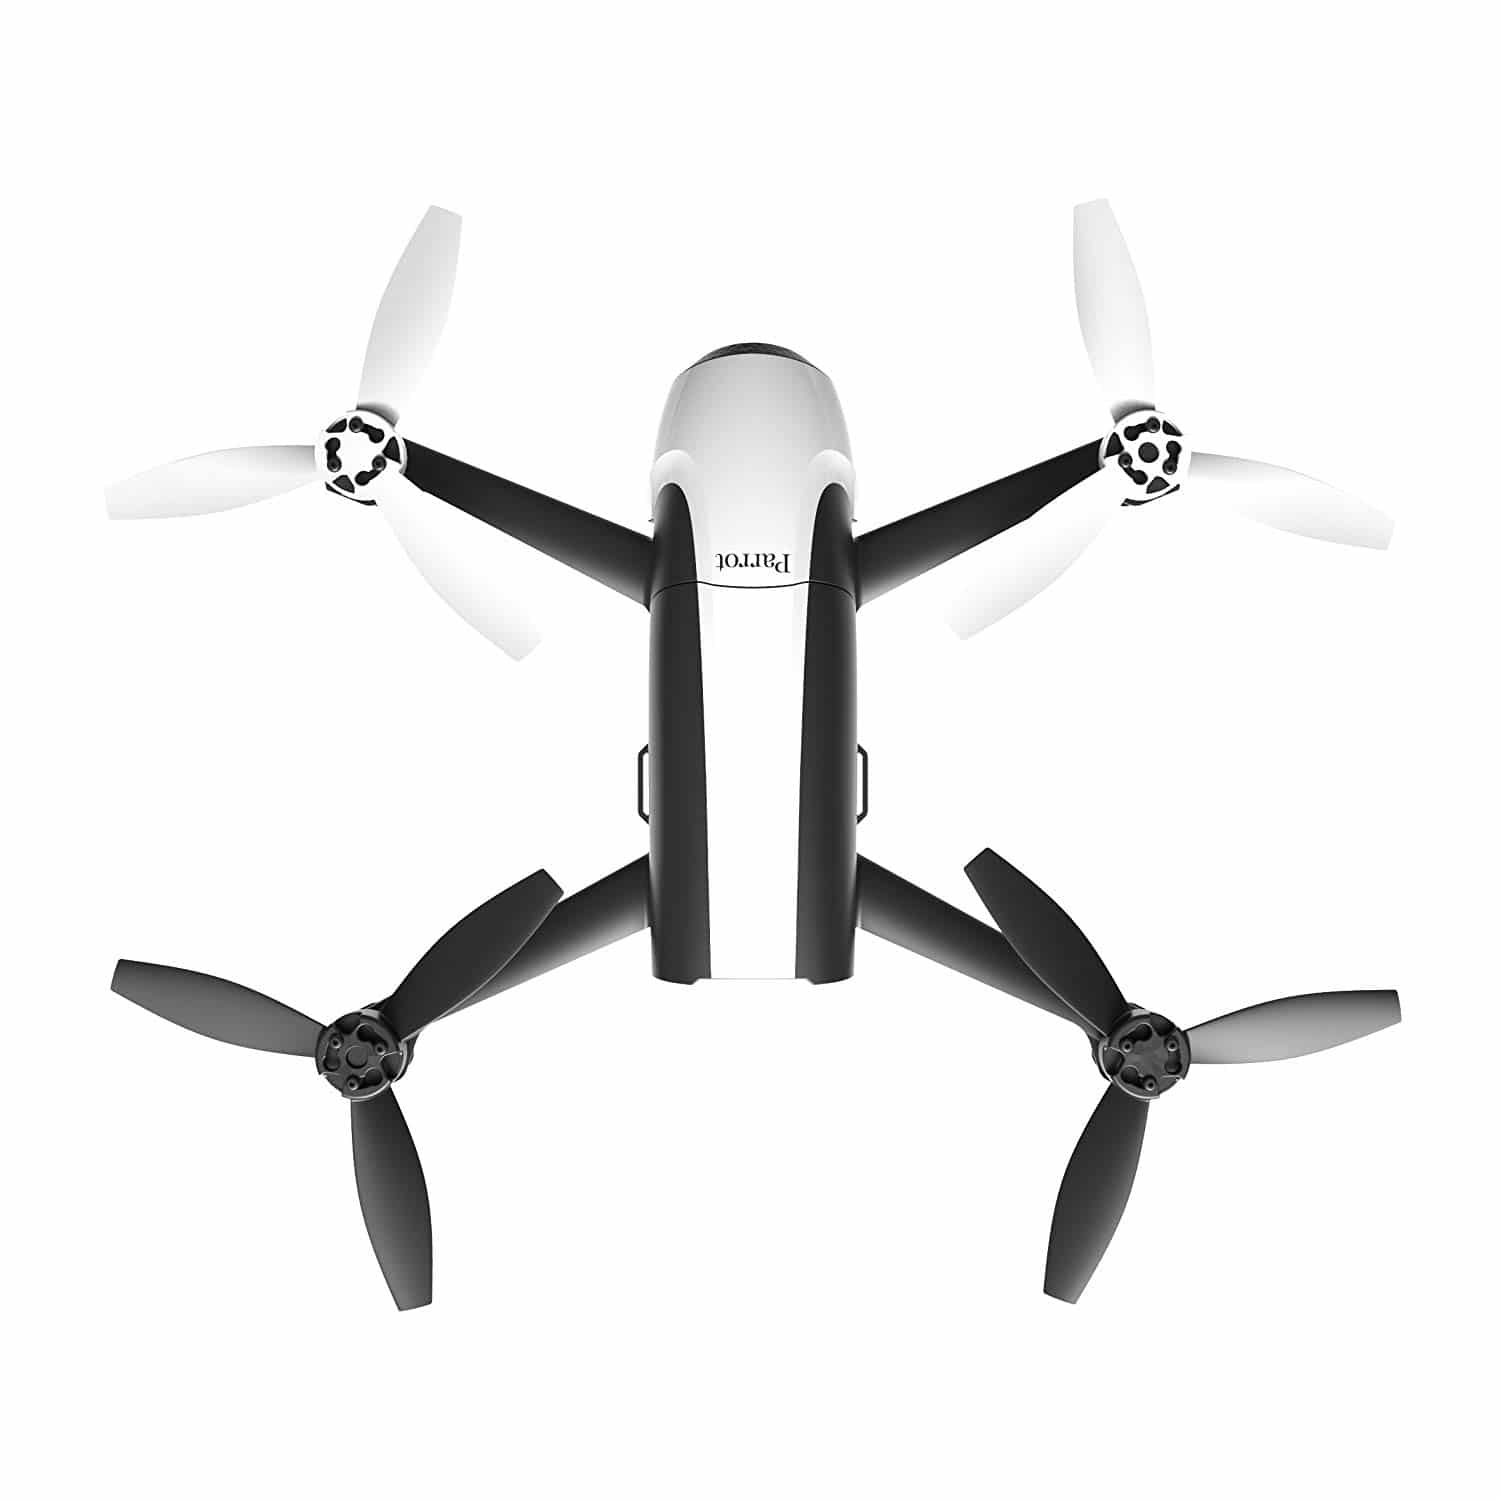  drone flying tips, flying quadcopter tips, drone piloting tips, how to fly a quadcopter, quadcopter beginner tips, drone flying techniques, drone tips and tricks, how to fly a drone, drone flying lessons, how to fly a drone for beginners.